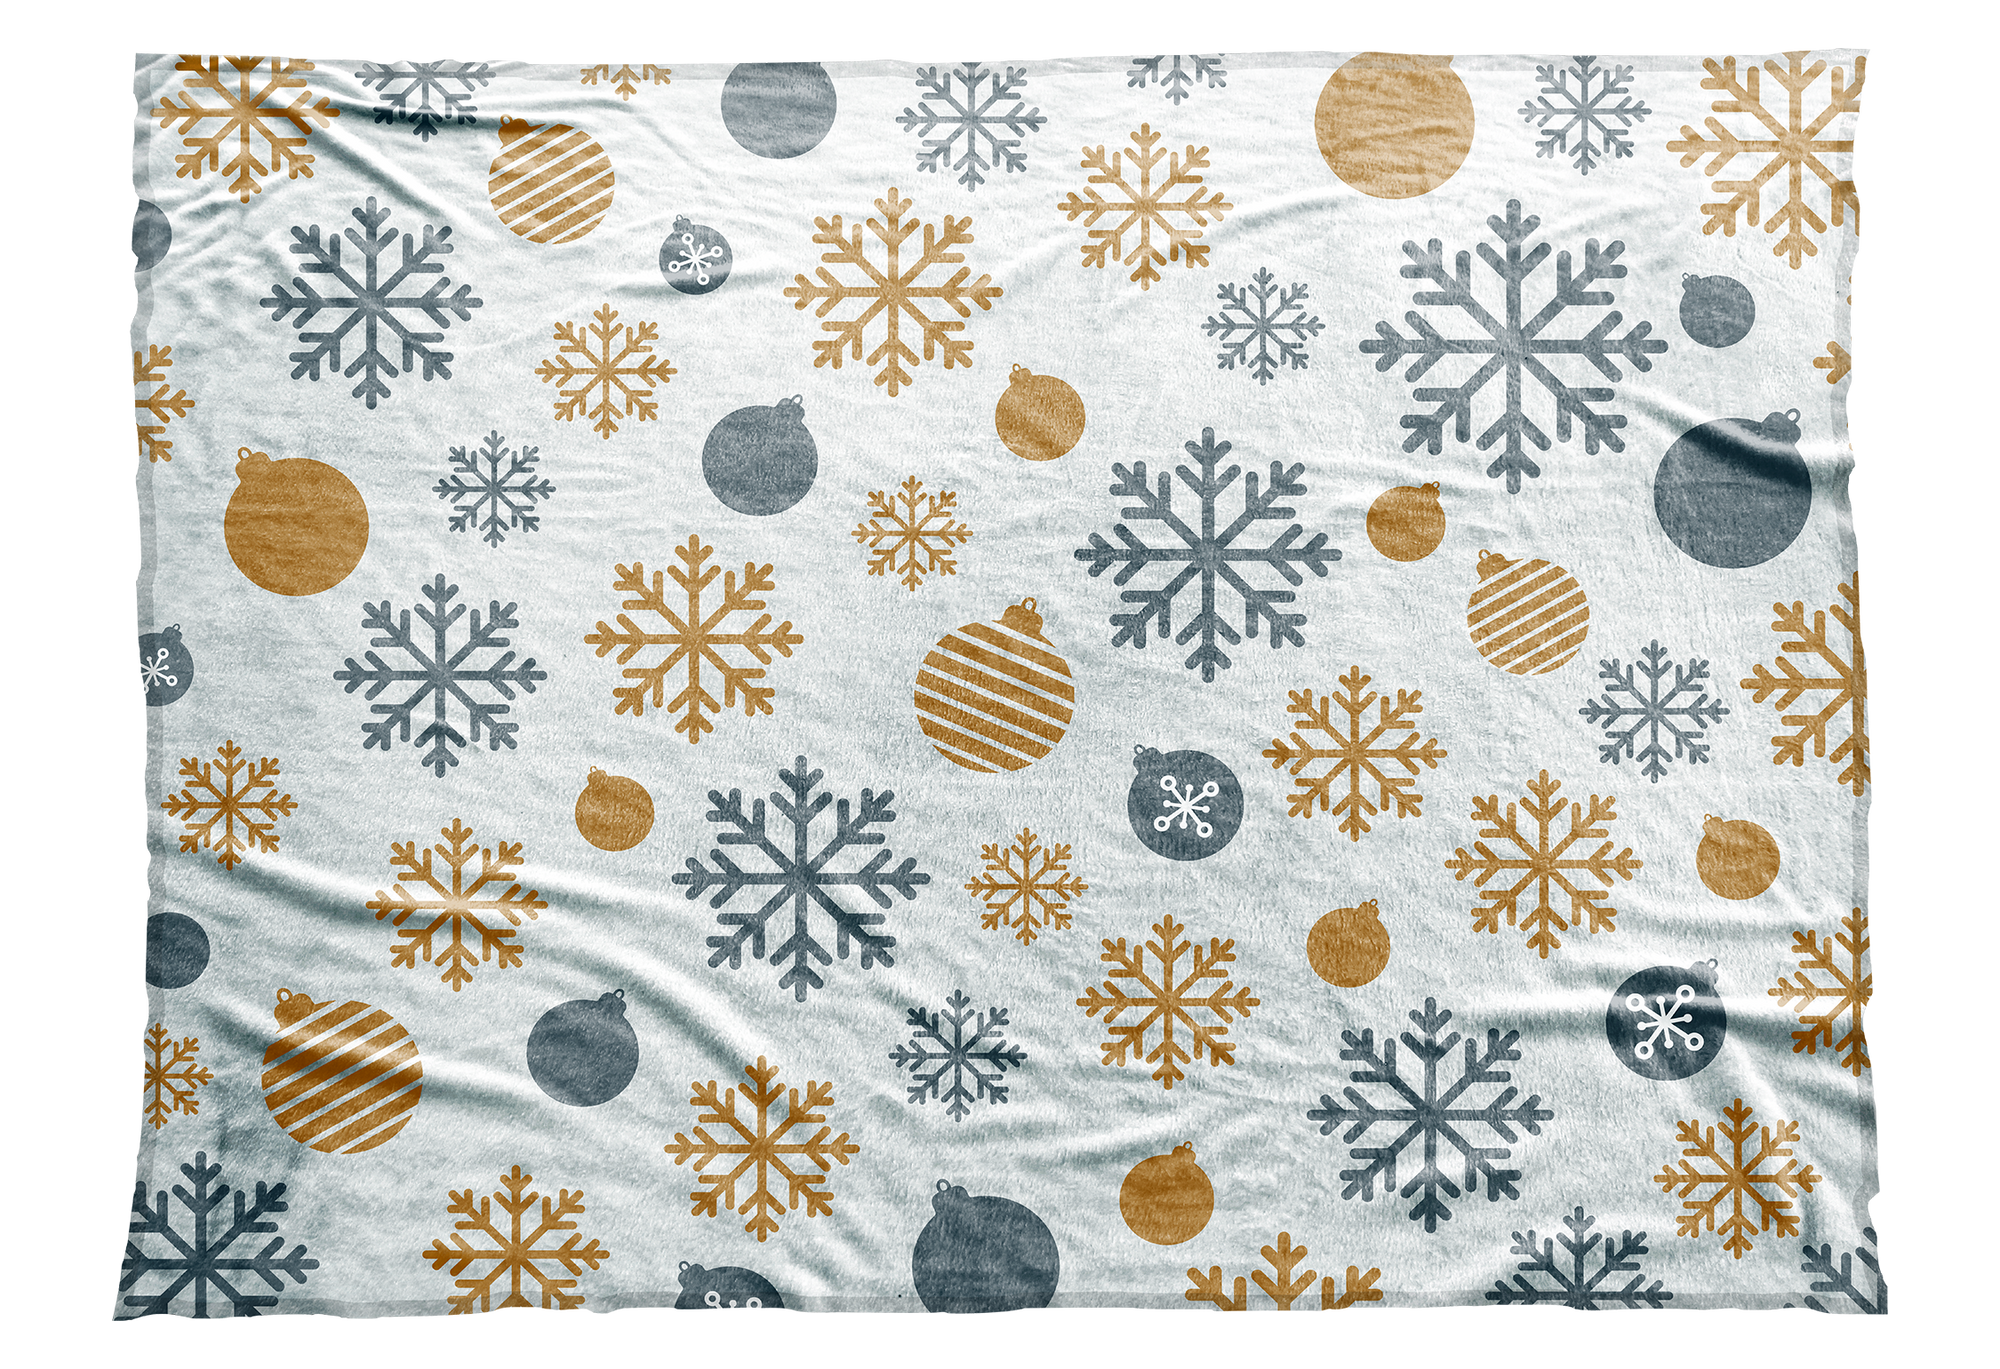 Silver and gold snowflakes and Christmas ball ornaments decorate this seasonal blanket.